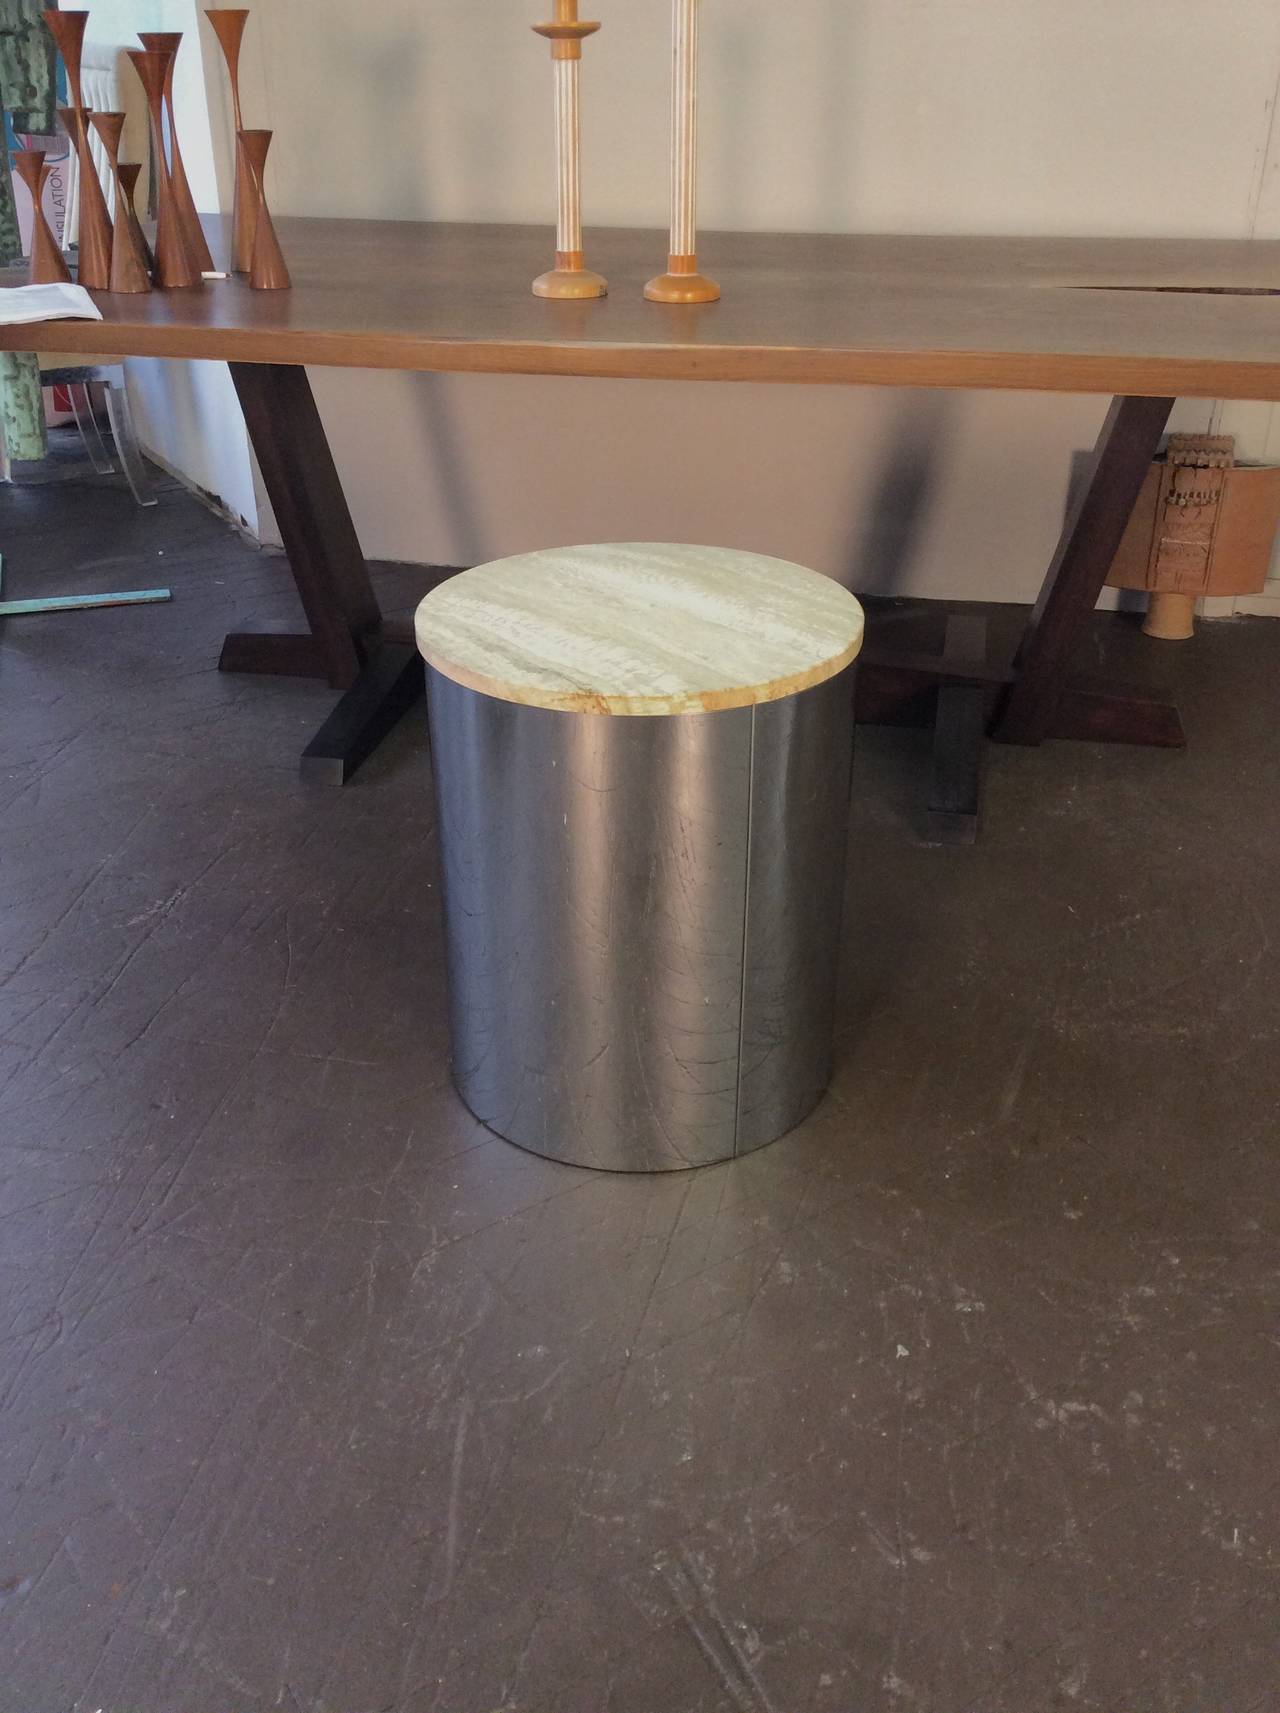 Sleek chrome drum table with travertine top by C. Jere, circa 1975. This piece is in excellent vintage condition. Chrome has very few signs or wear. Travertine top has no chips or losses.